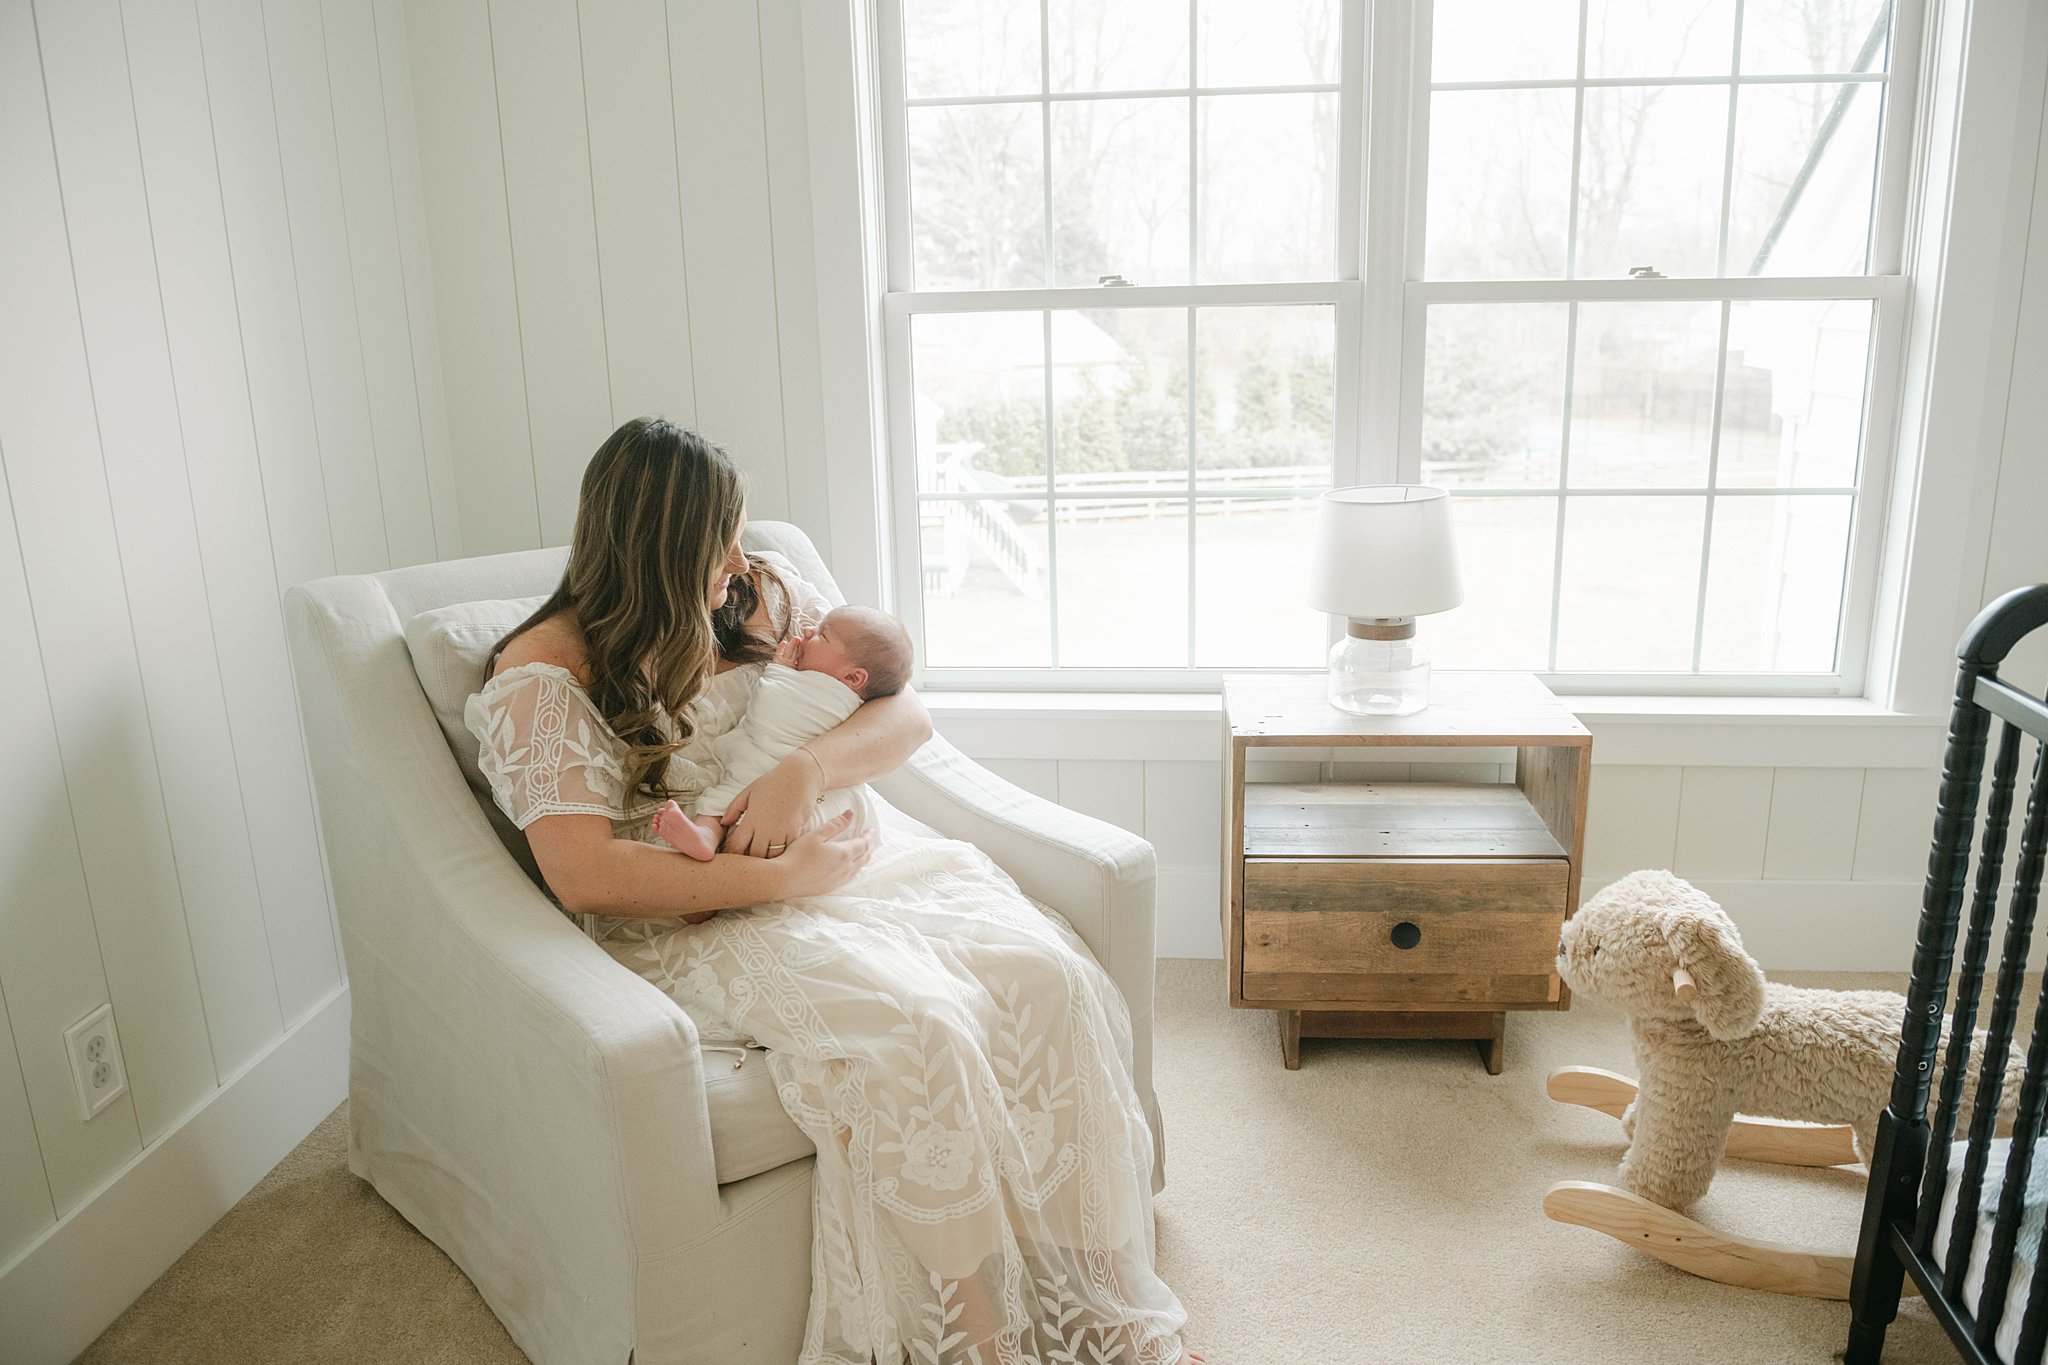 A mother sits in a nursery chair in front of a window with a soft rocking horse and rustic side table while holding her newborn baby blossoming bellies